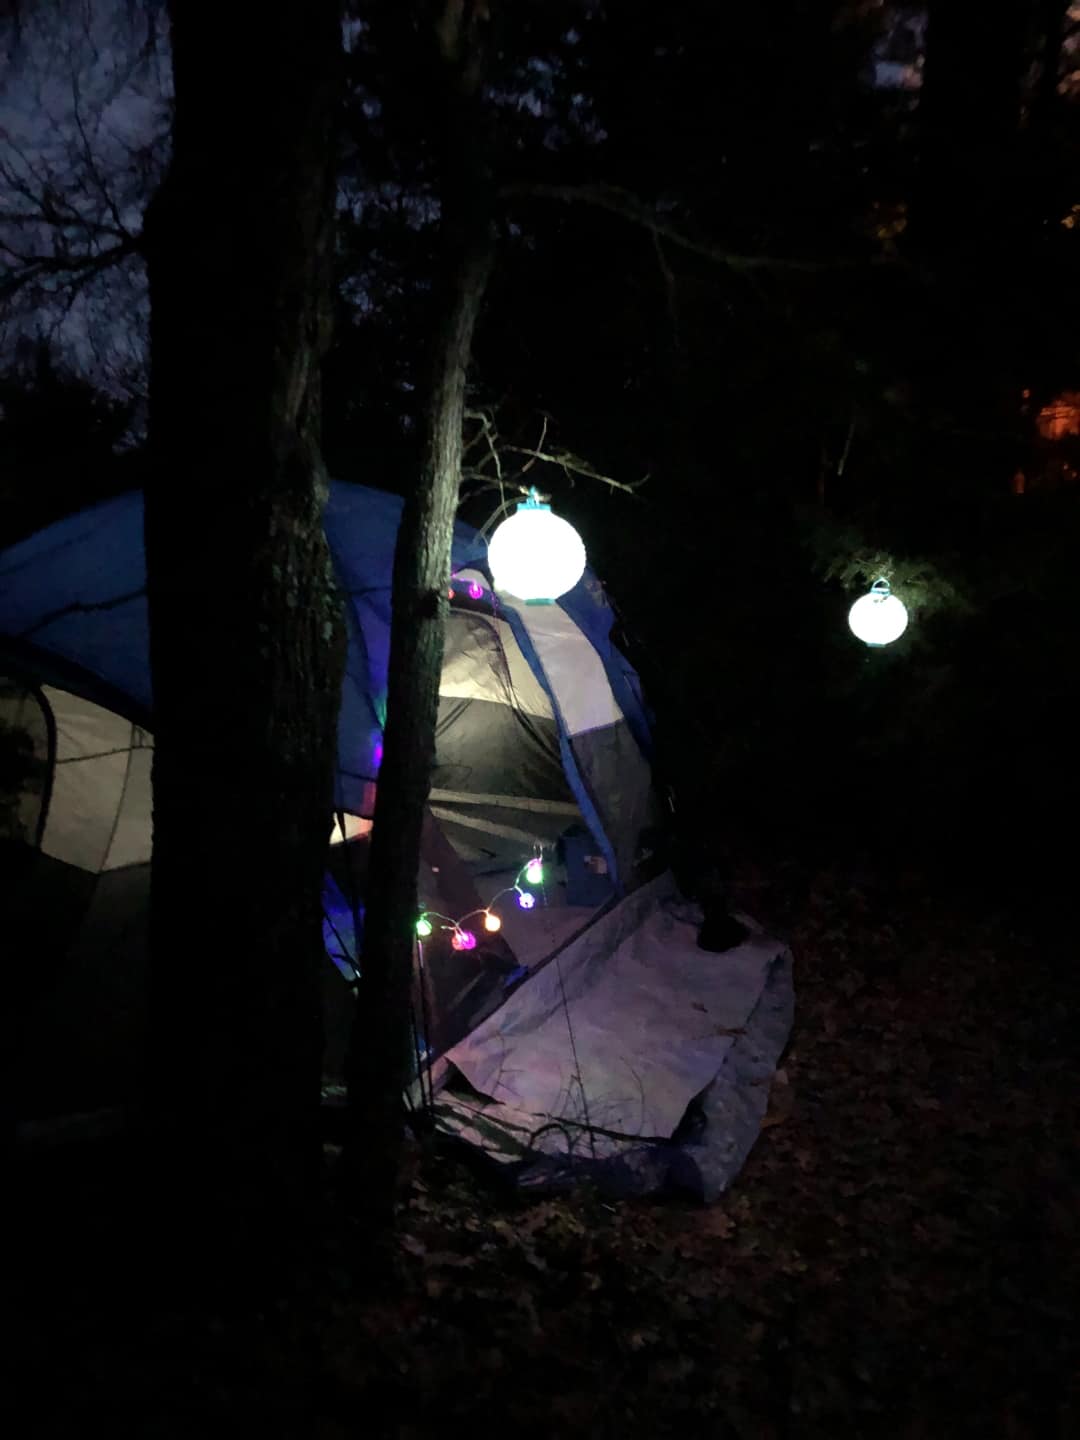 An example of a cozy tent. This is a tall pop-up tent complete with LED Christmas Lights, decorative Japanese glow ball lamps and even a queen size air matress on a frame. Then tent has rugs for extra comfort and cleanliness.